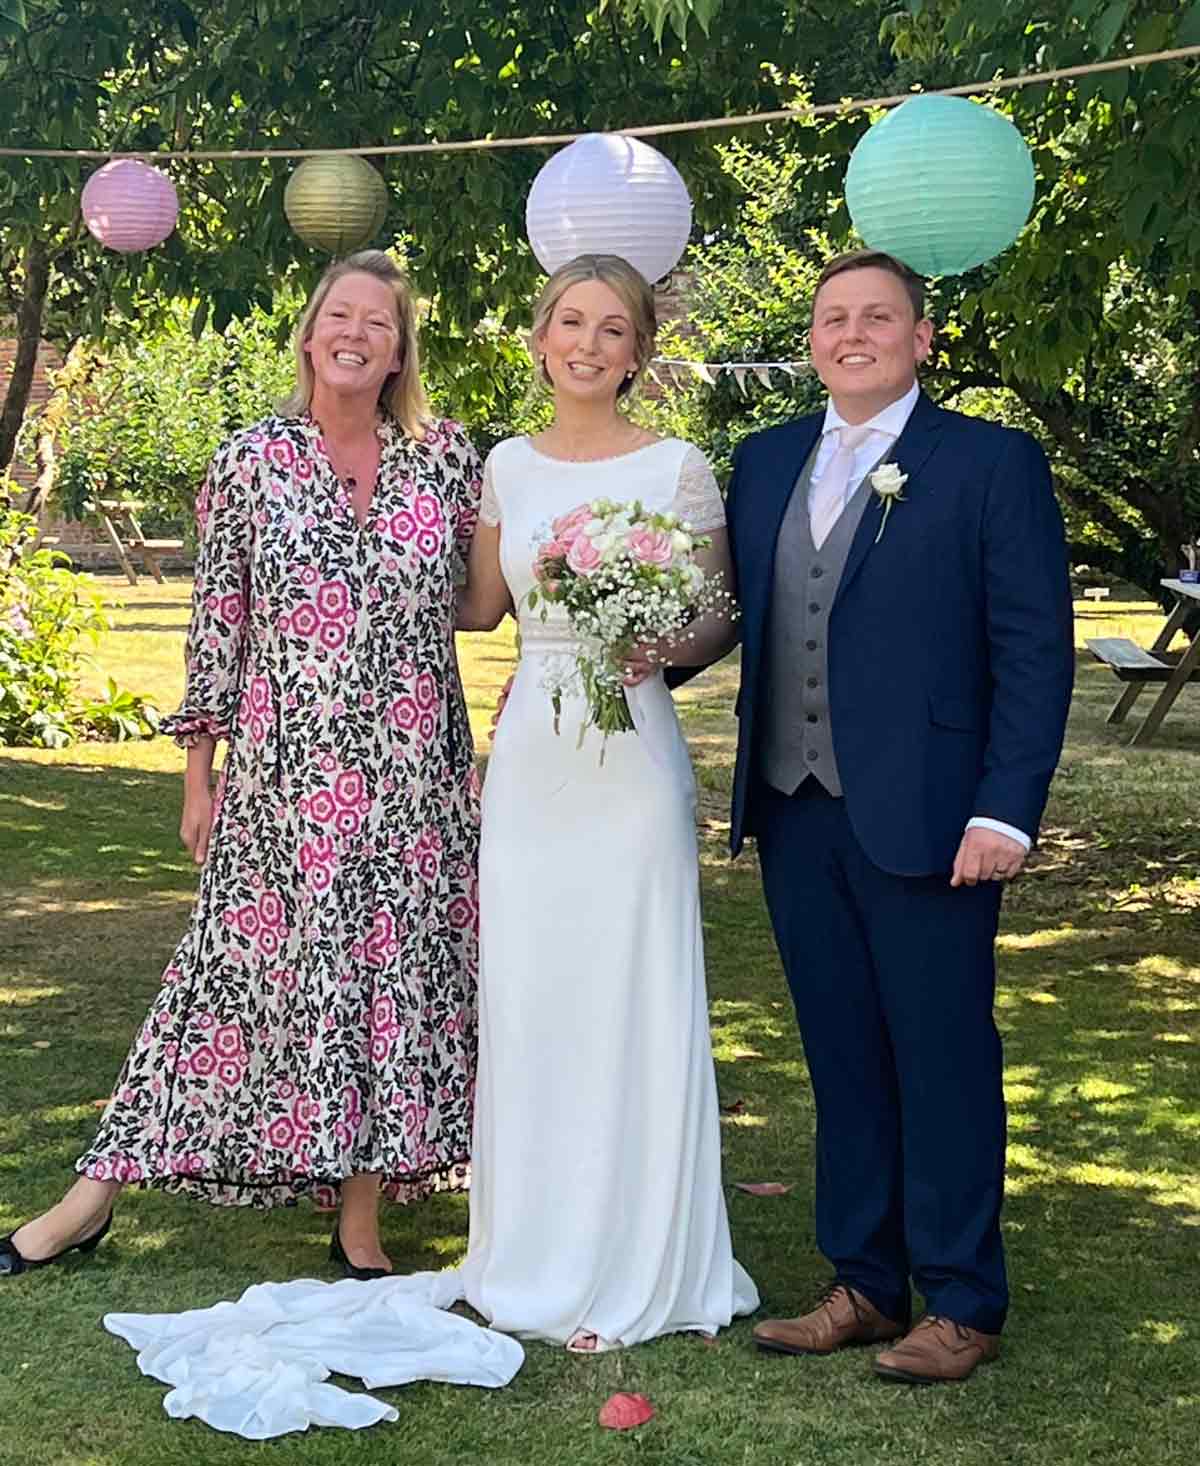 A happy bride & groom at their summer wedding with Tara the Celebrant